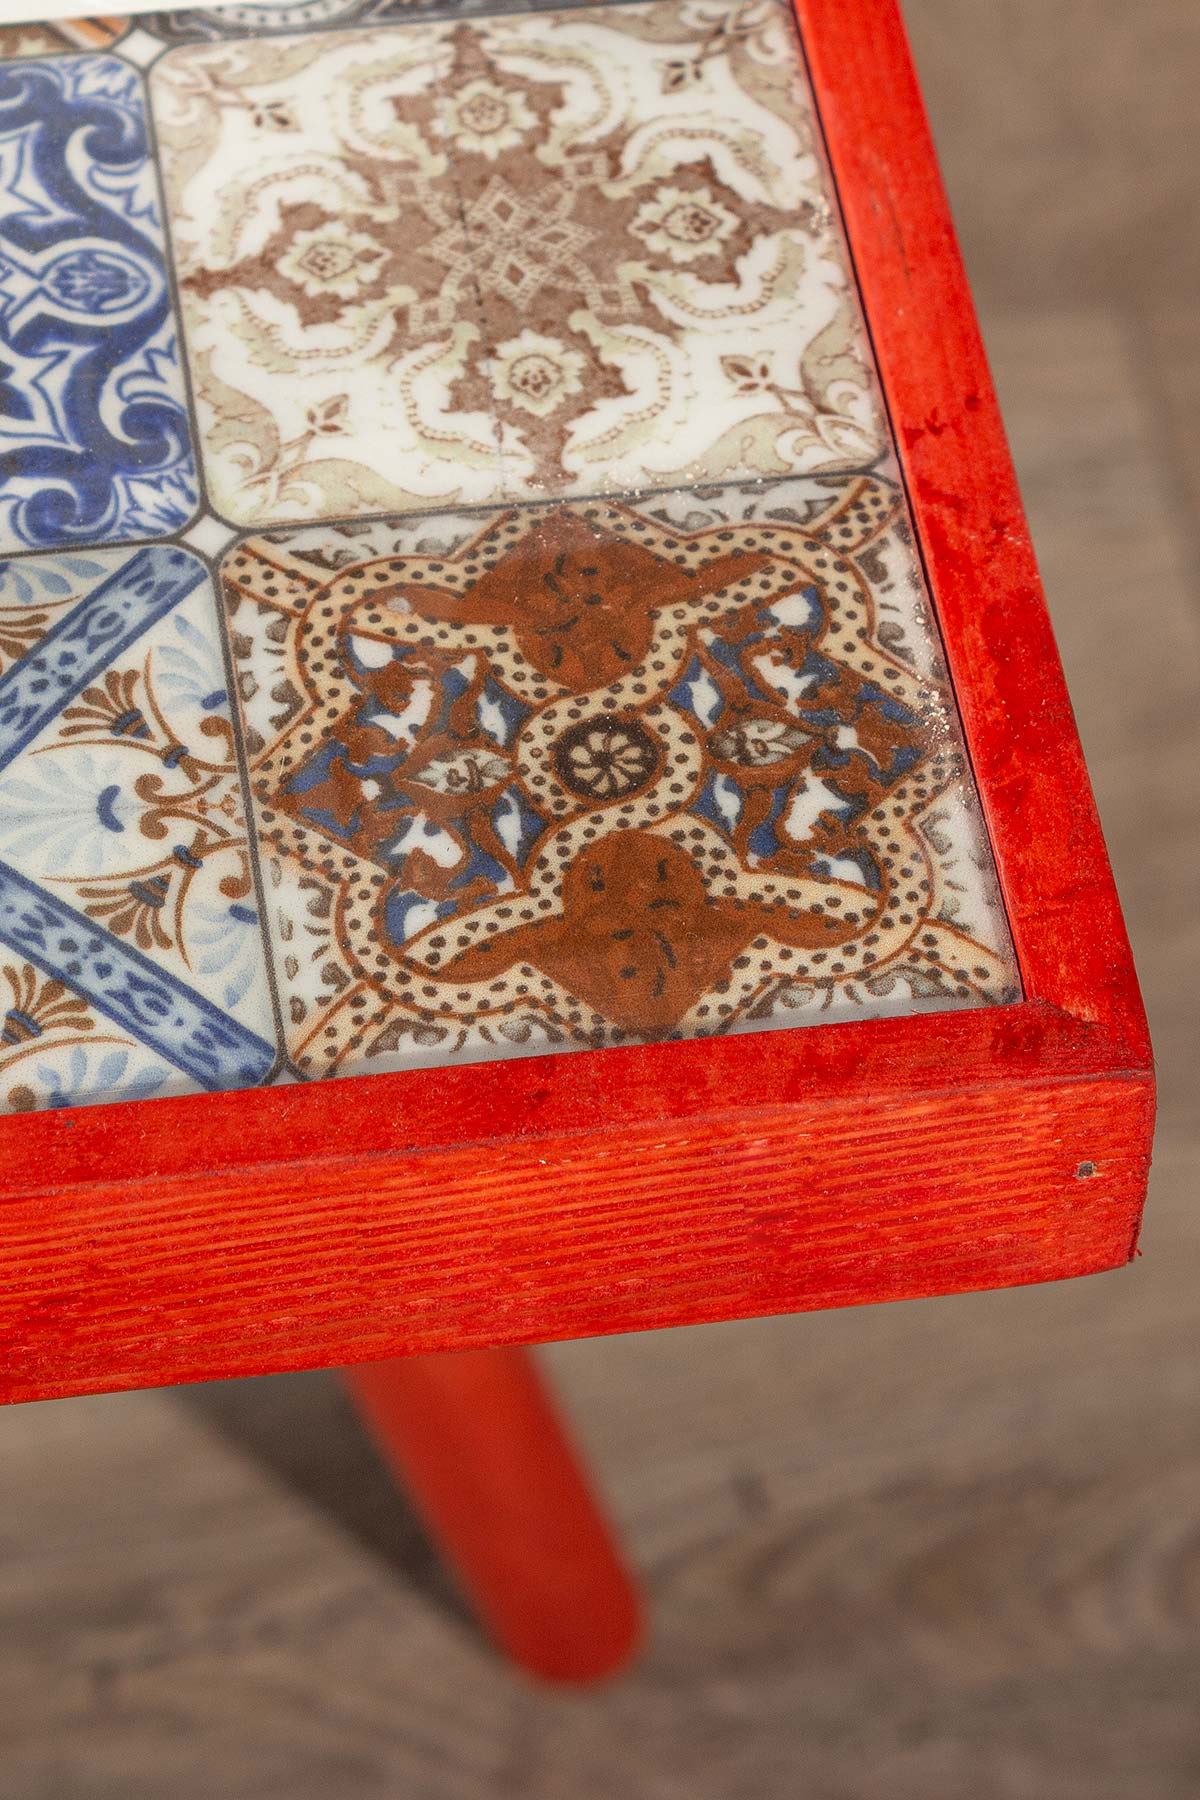 Bofigo Wooden Tile Center Table Wooden Solid Wood Table 32x32 Cm Red